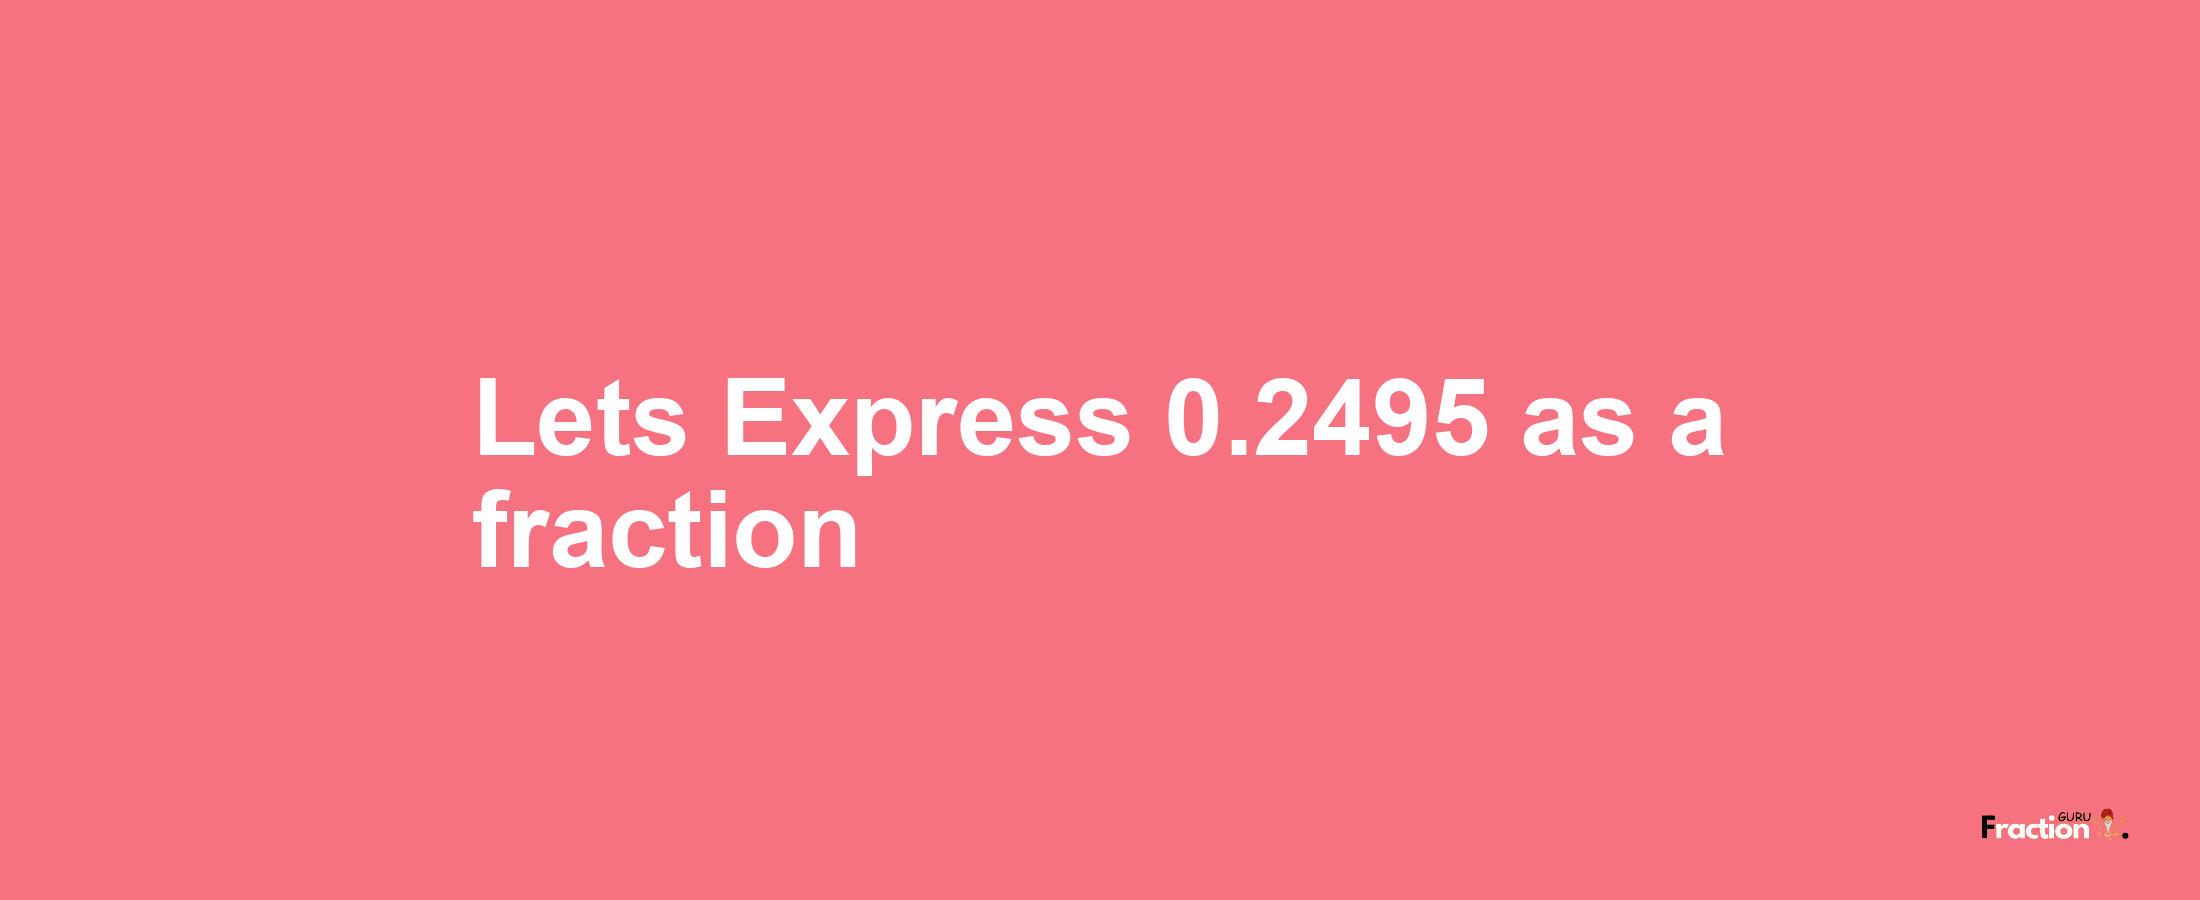 Lets Express 0.2495 as afraction